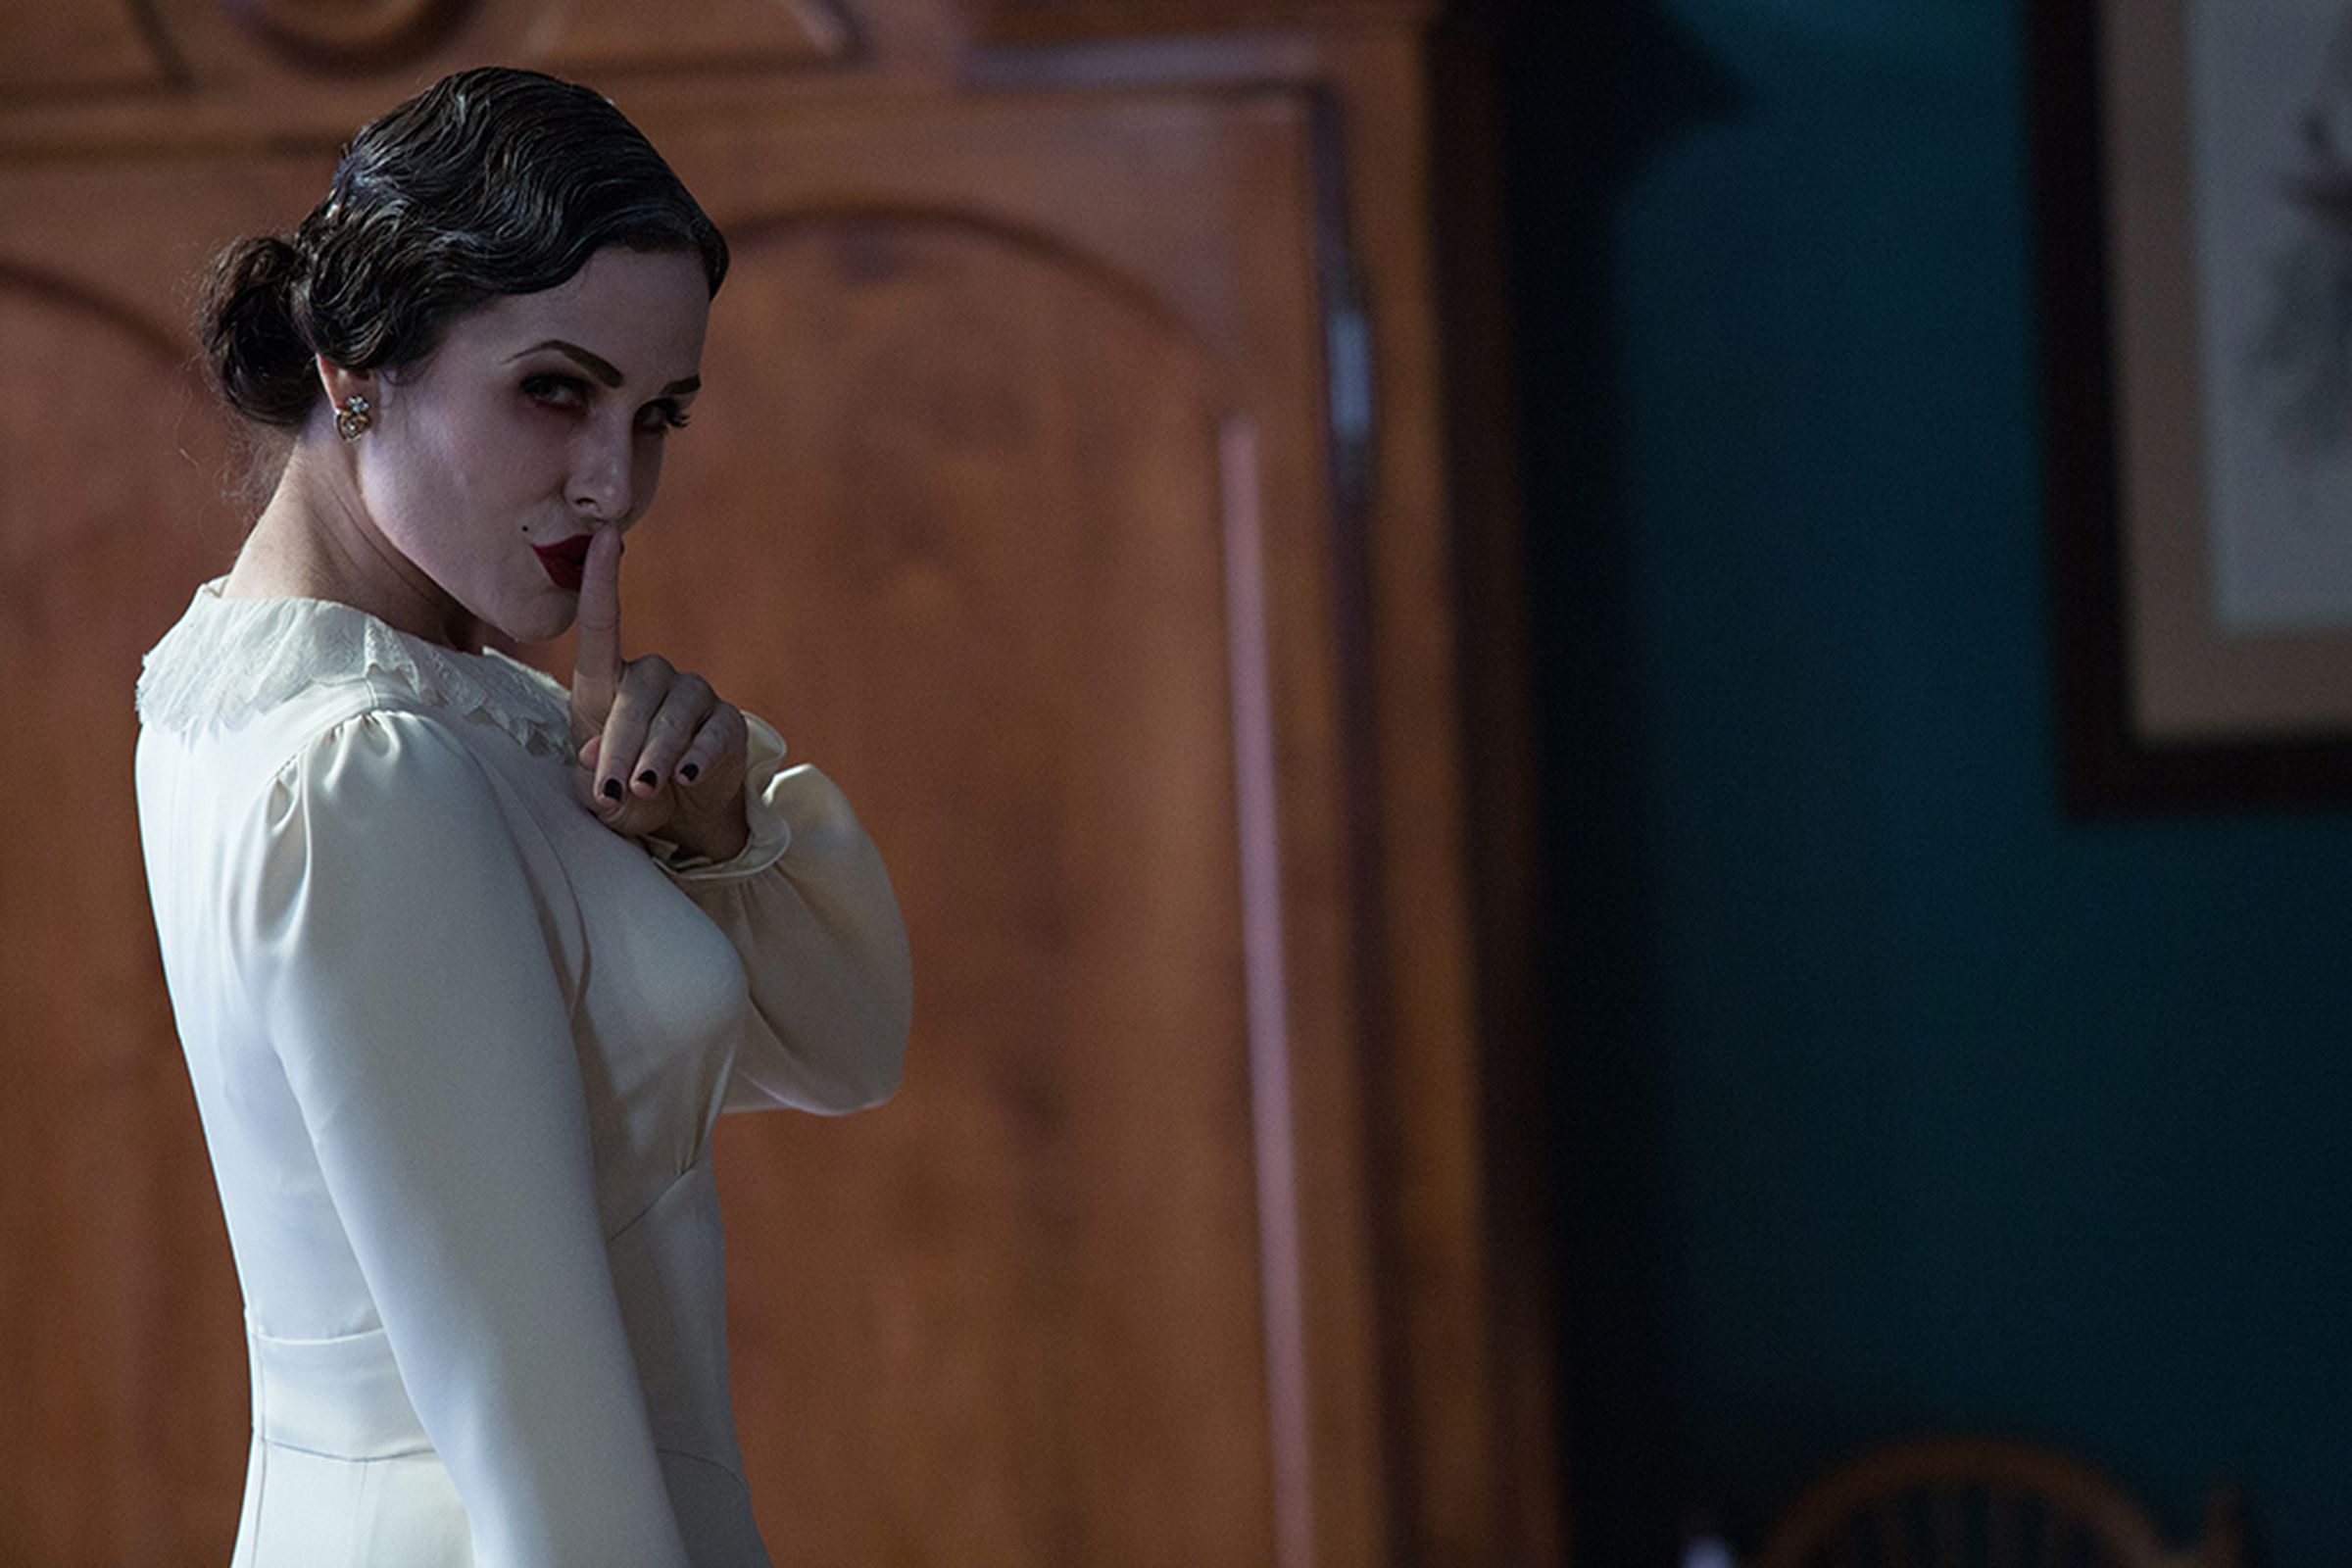 insidious: chapter 2 (PUBLICITY STILL - FILM DISTRICT)